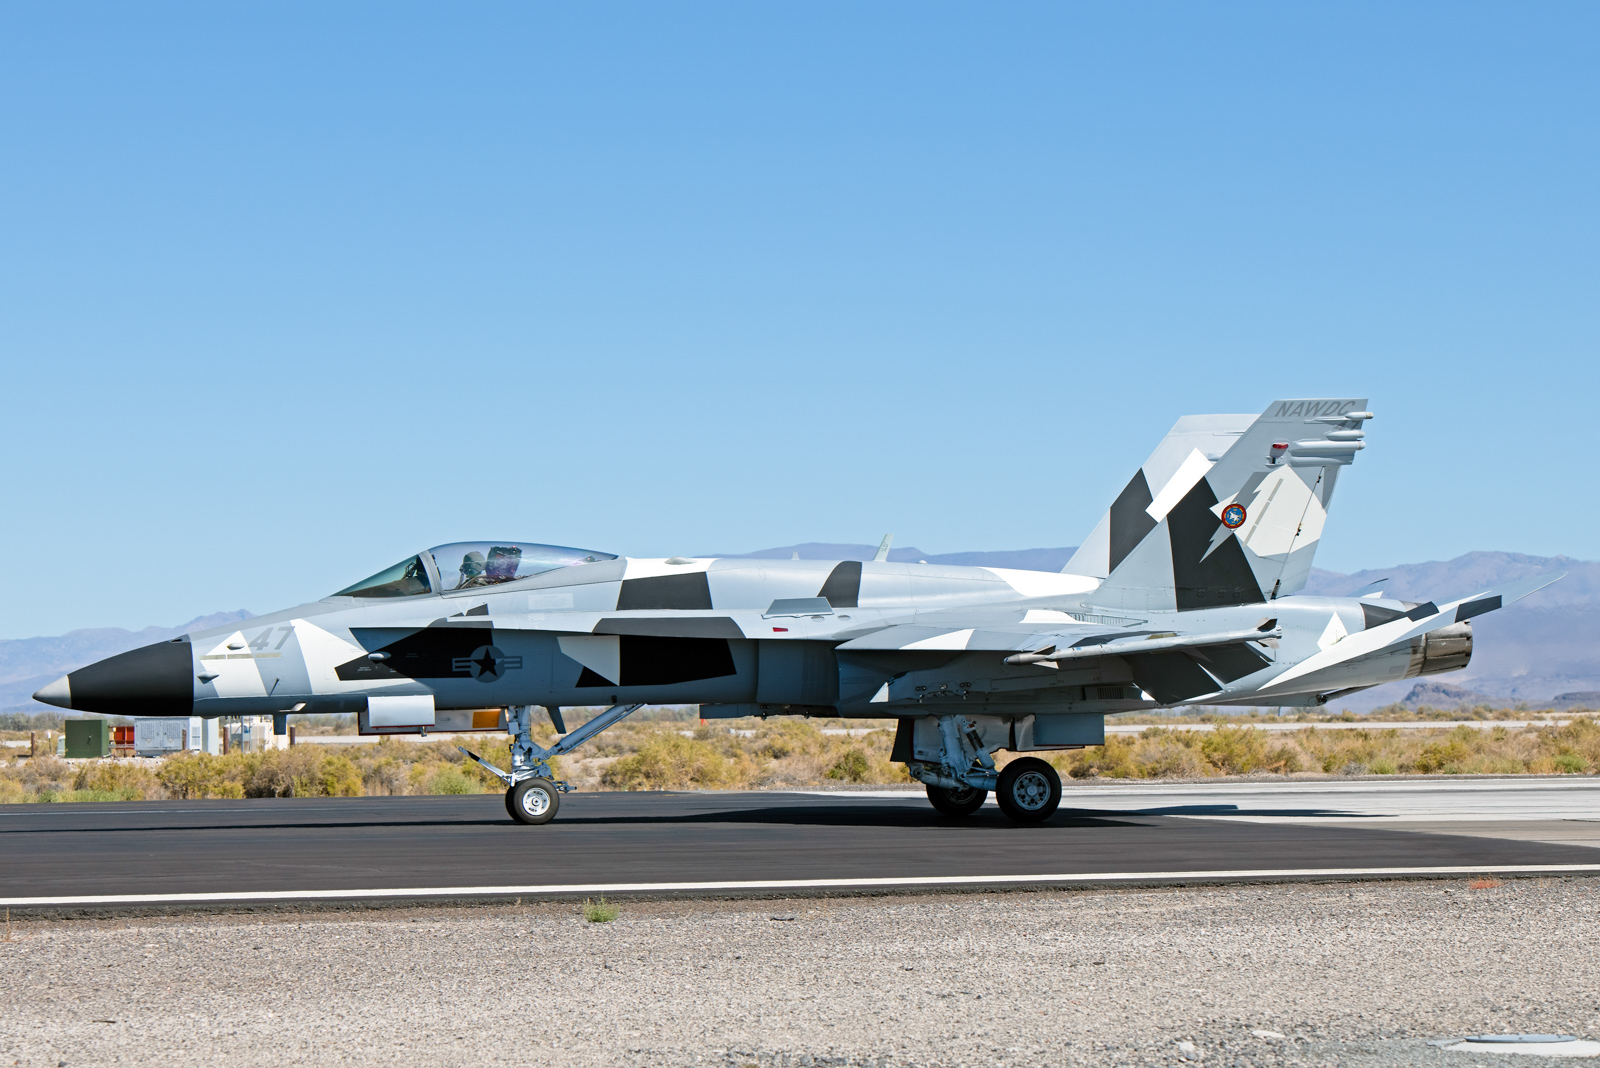 a FA-18C recently transferred to NAWDAC from VFC-12/Fighting Omars. This aircraft carries an Arctic camouflage that VFC-12 has on a few of their jets, but is the first at Fallon.